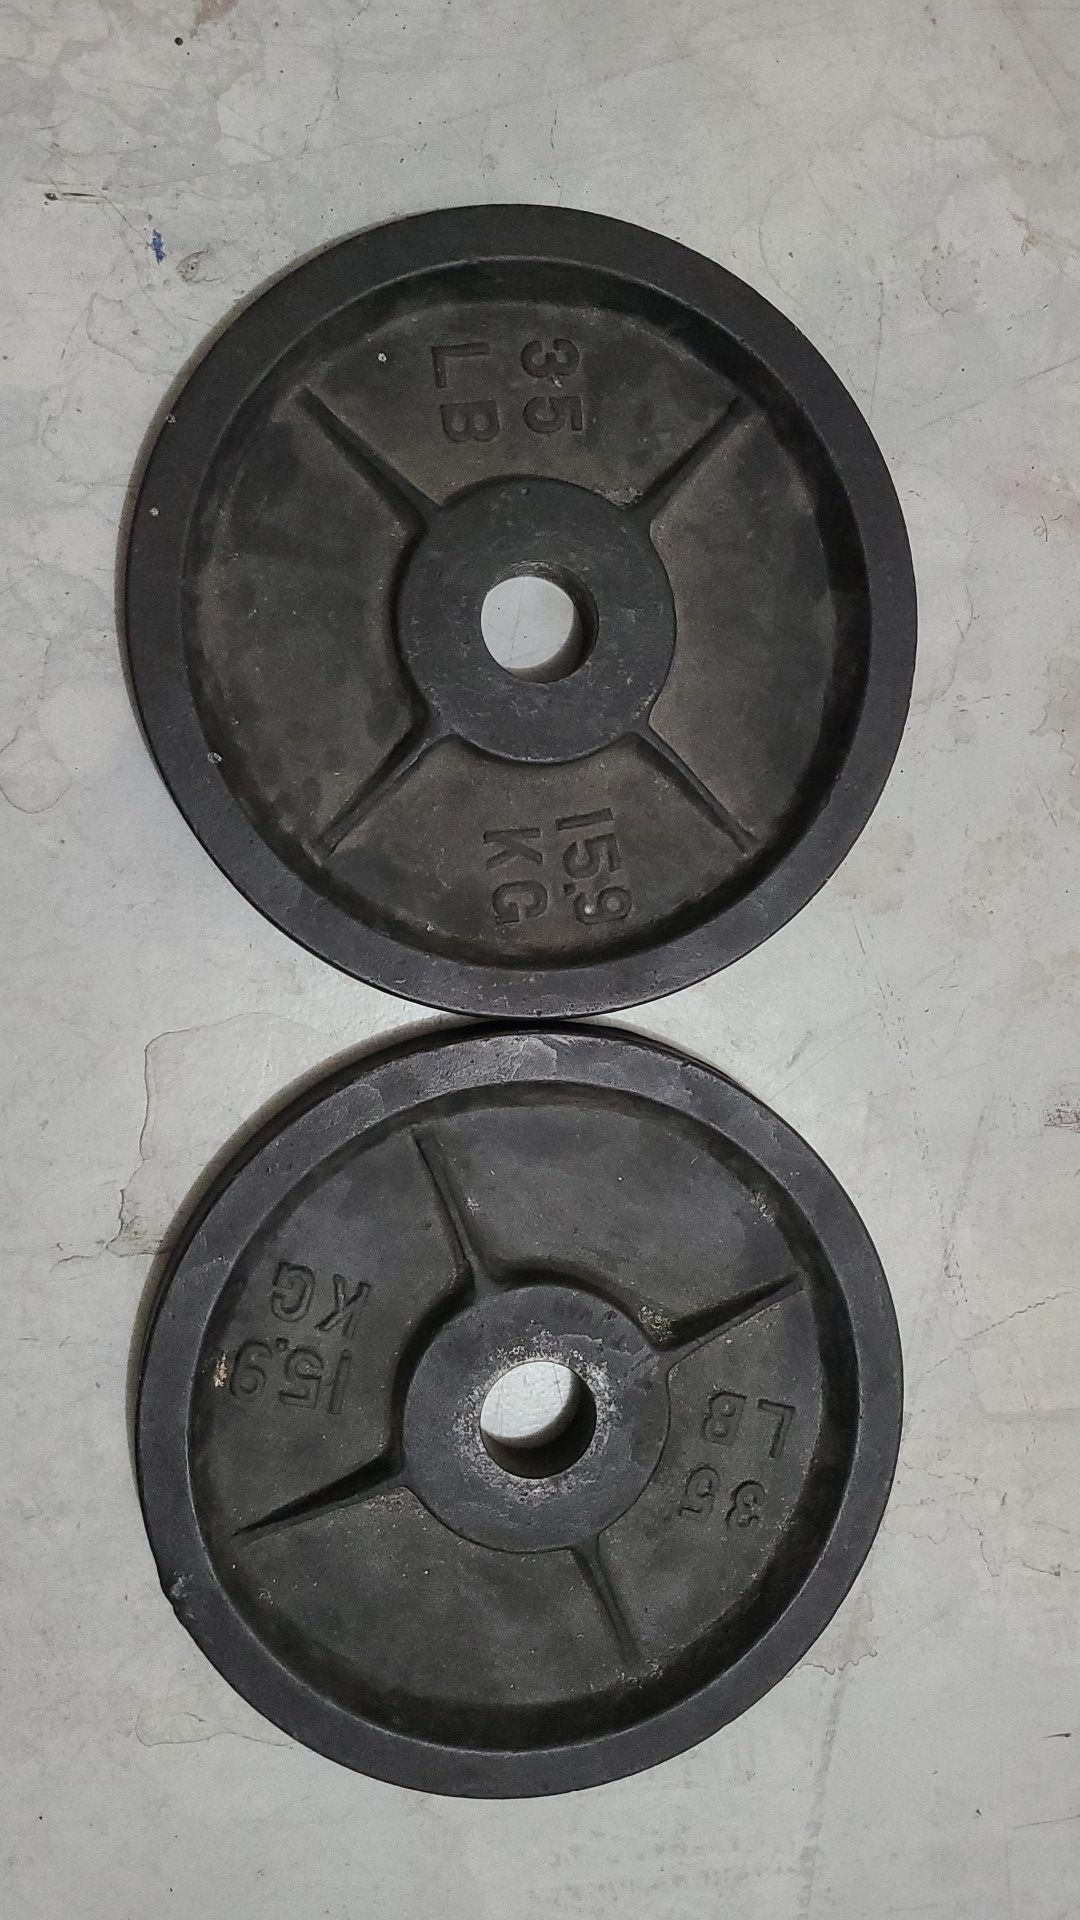 35lb Olympic Weights